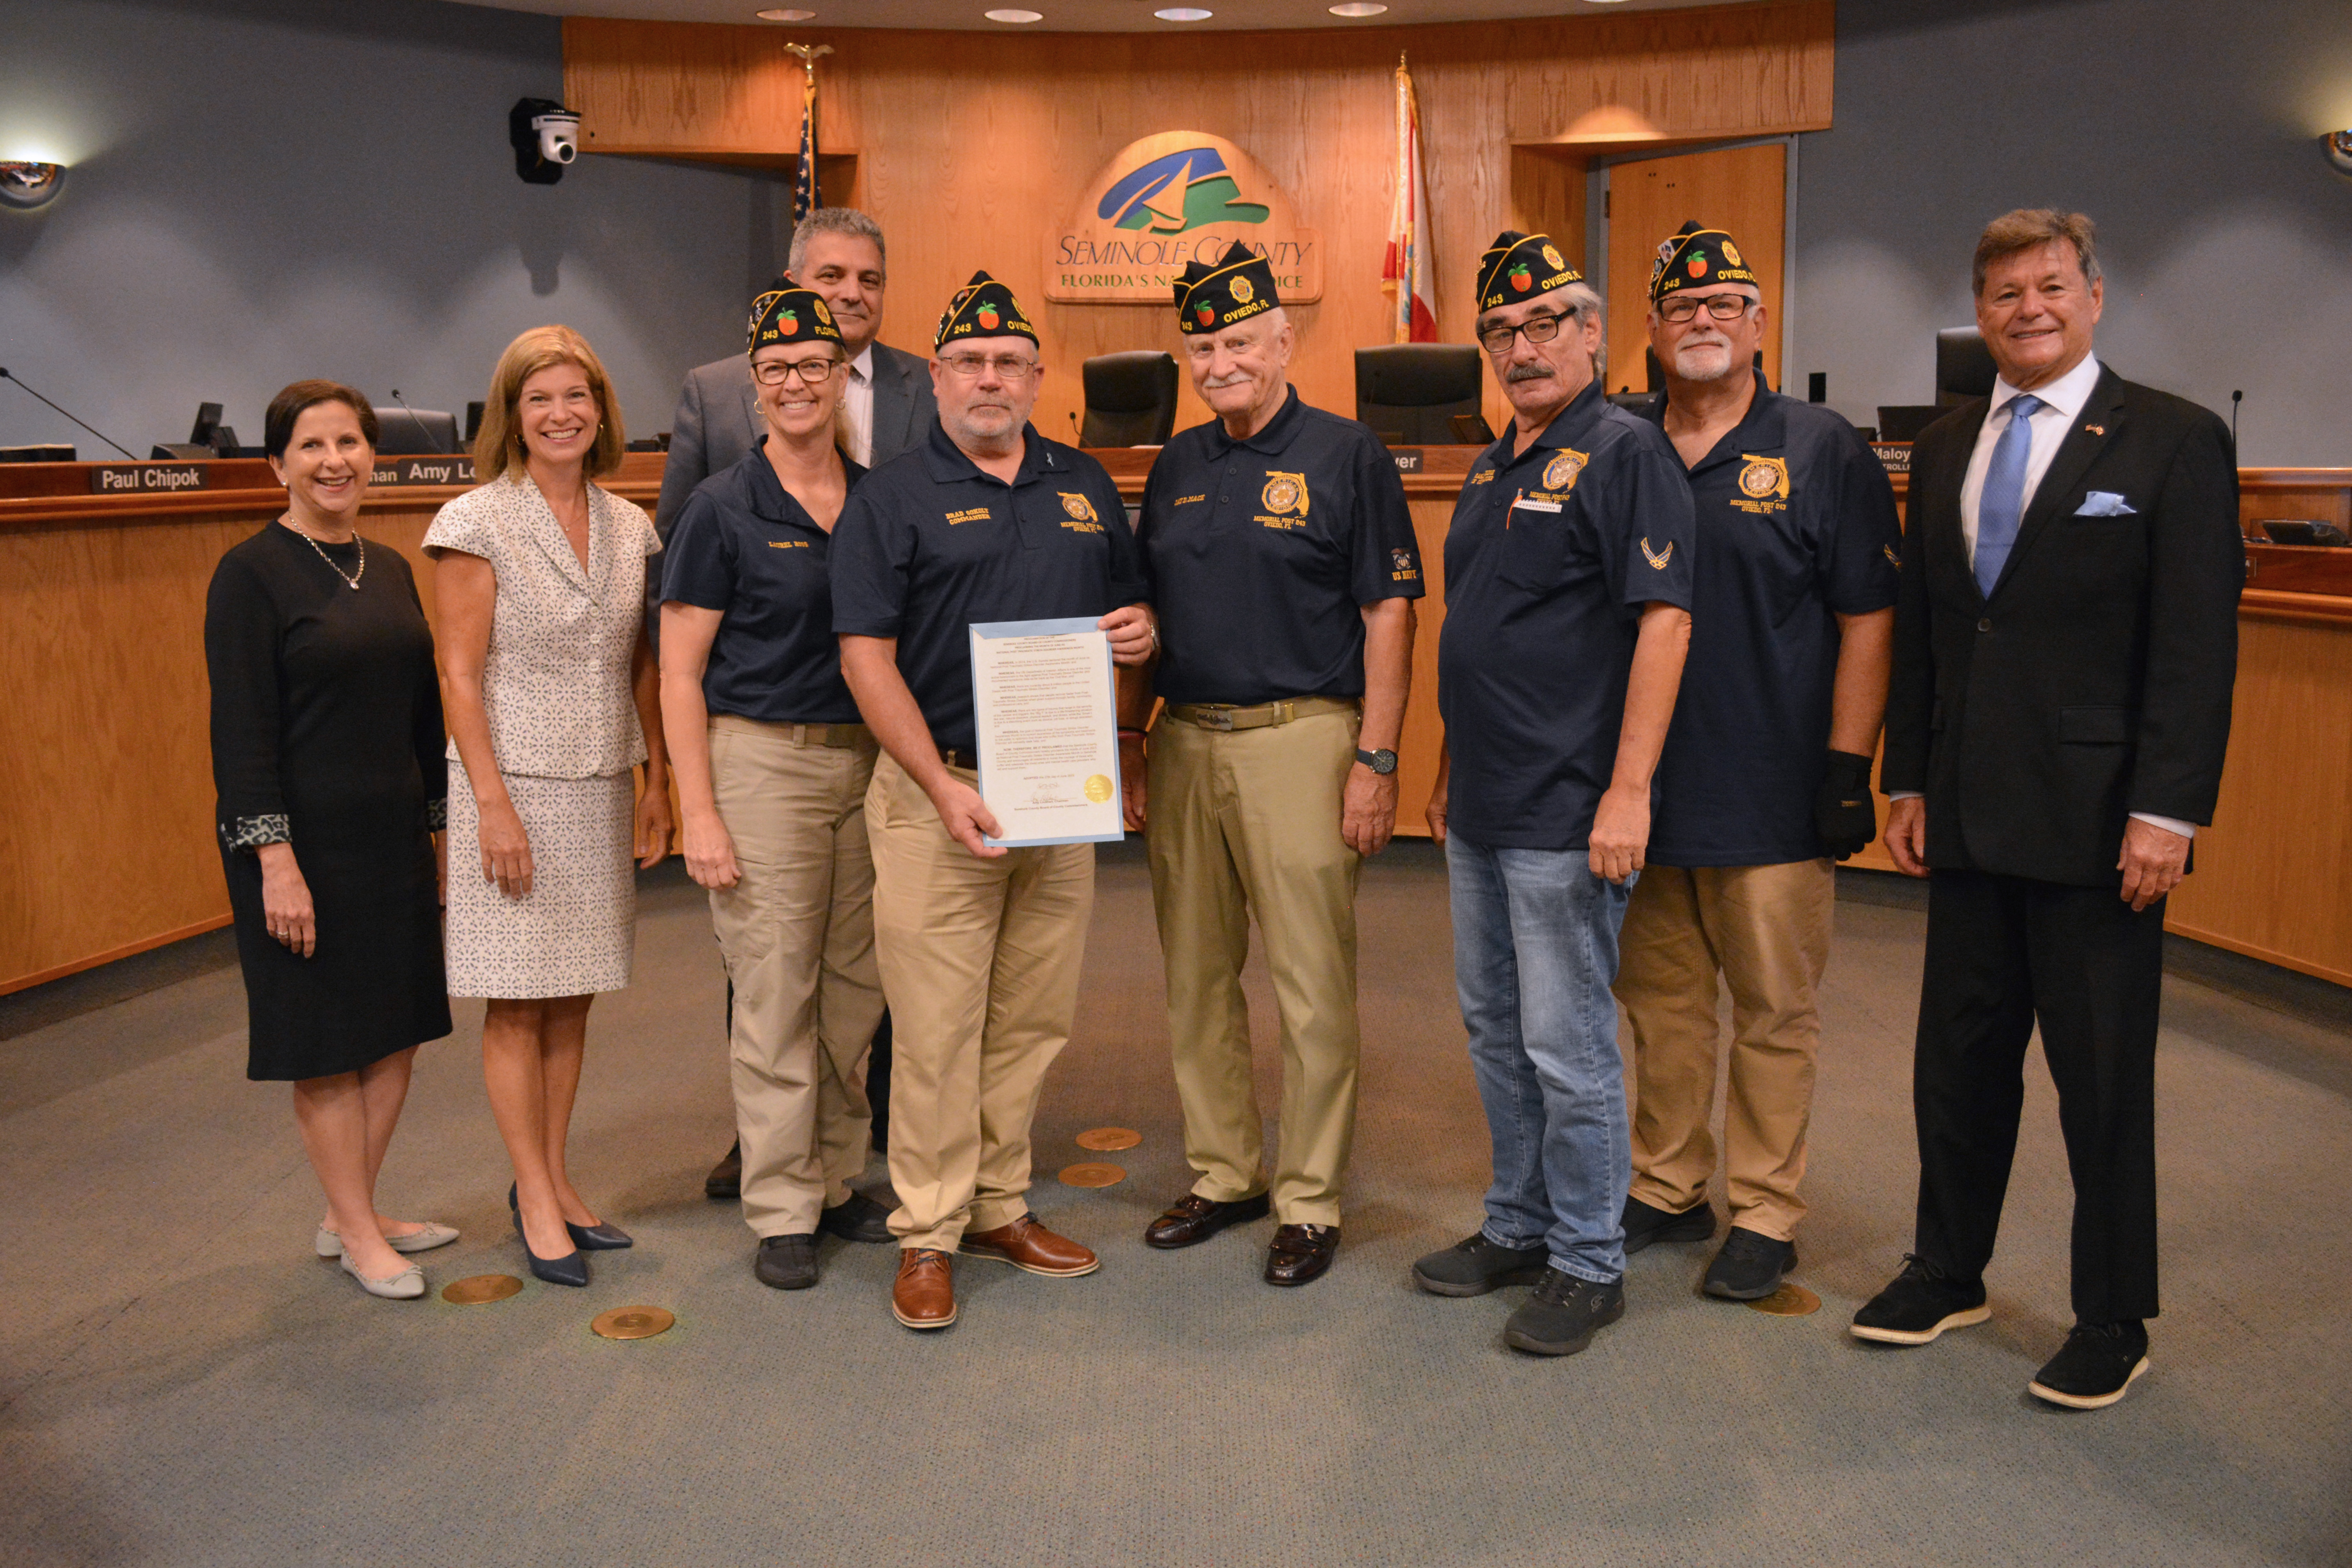 Proclamation — Proclaiming the Month of June as National Post Traumatic Stress Disorder Awareness Month in Seminole County (Brad Sokoly, Oviedo Memorial Post 243 Commander)